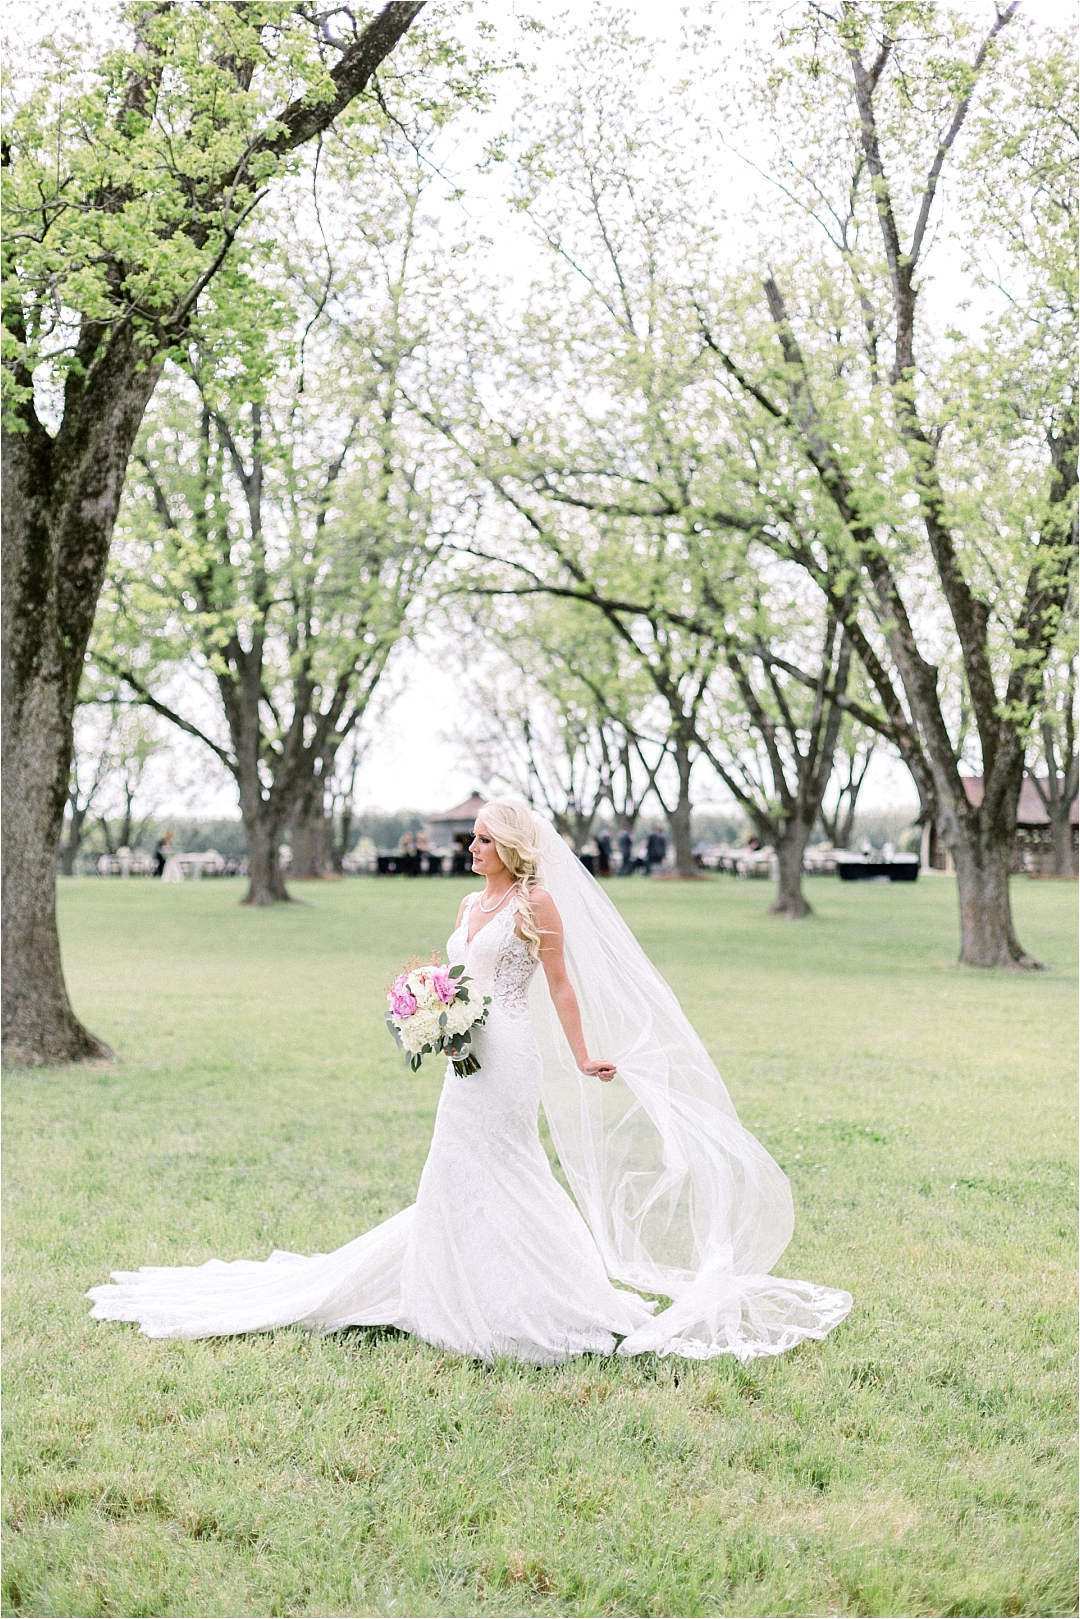 Bride in lace wedding dress_Photos by Leigh Wolfe, Atlanta's Top Wedding Photographer